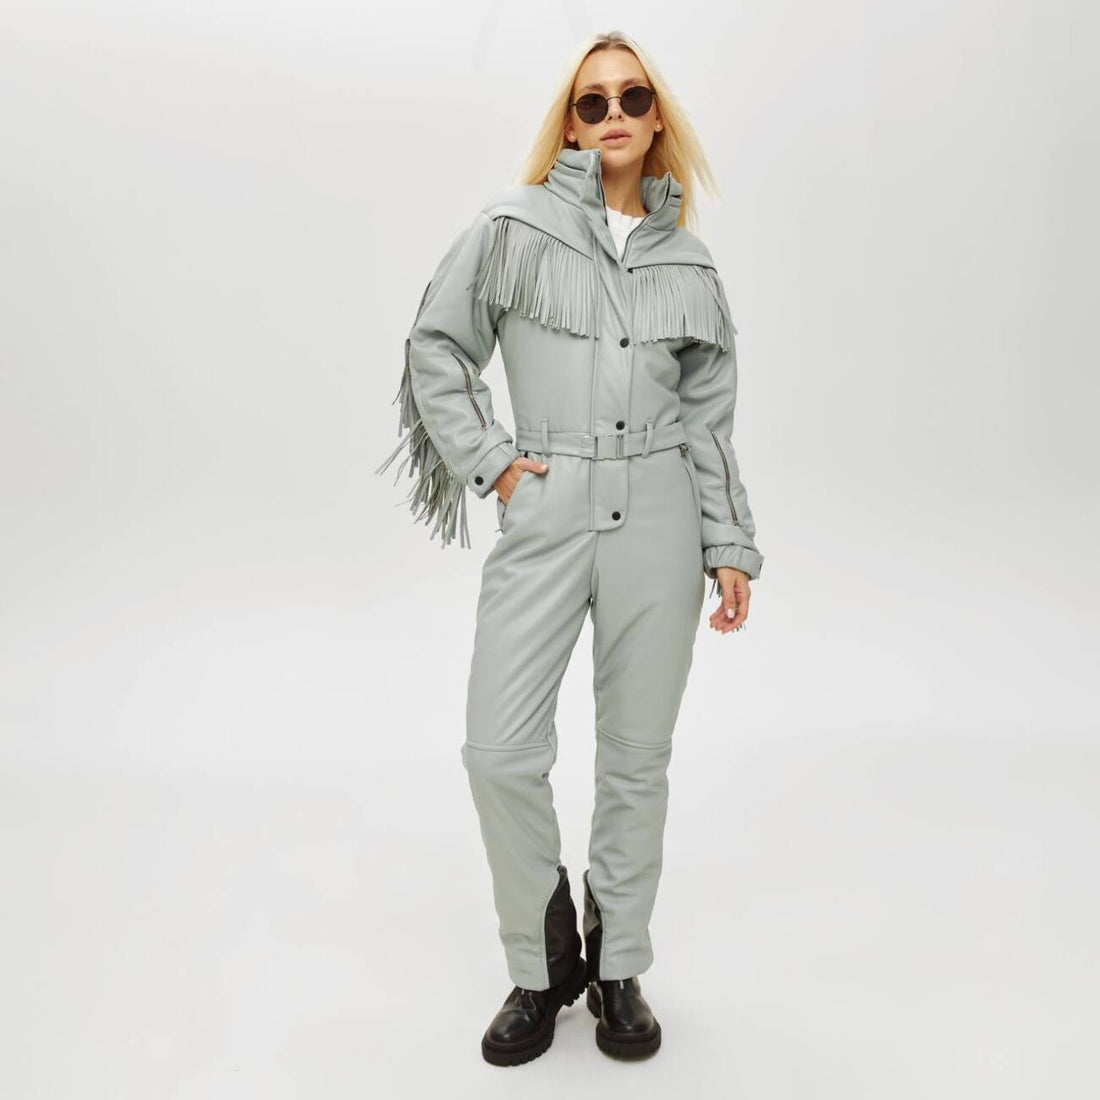 Ski suit with tassles - BONA - GRAY - Weatern snowsuit for winter outfit ski vacation